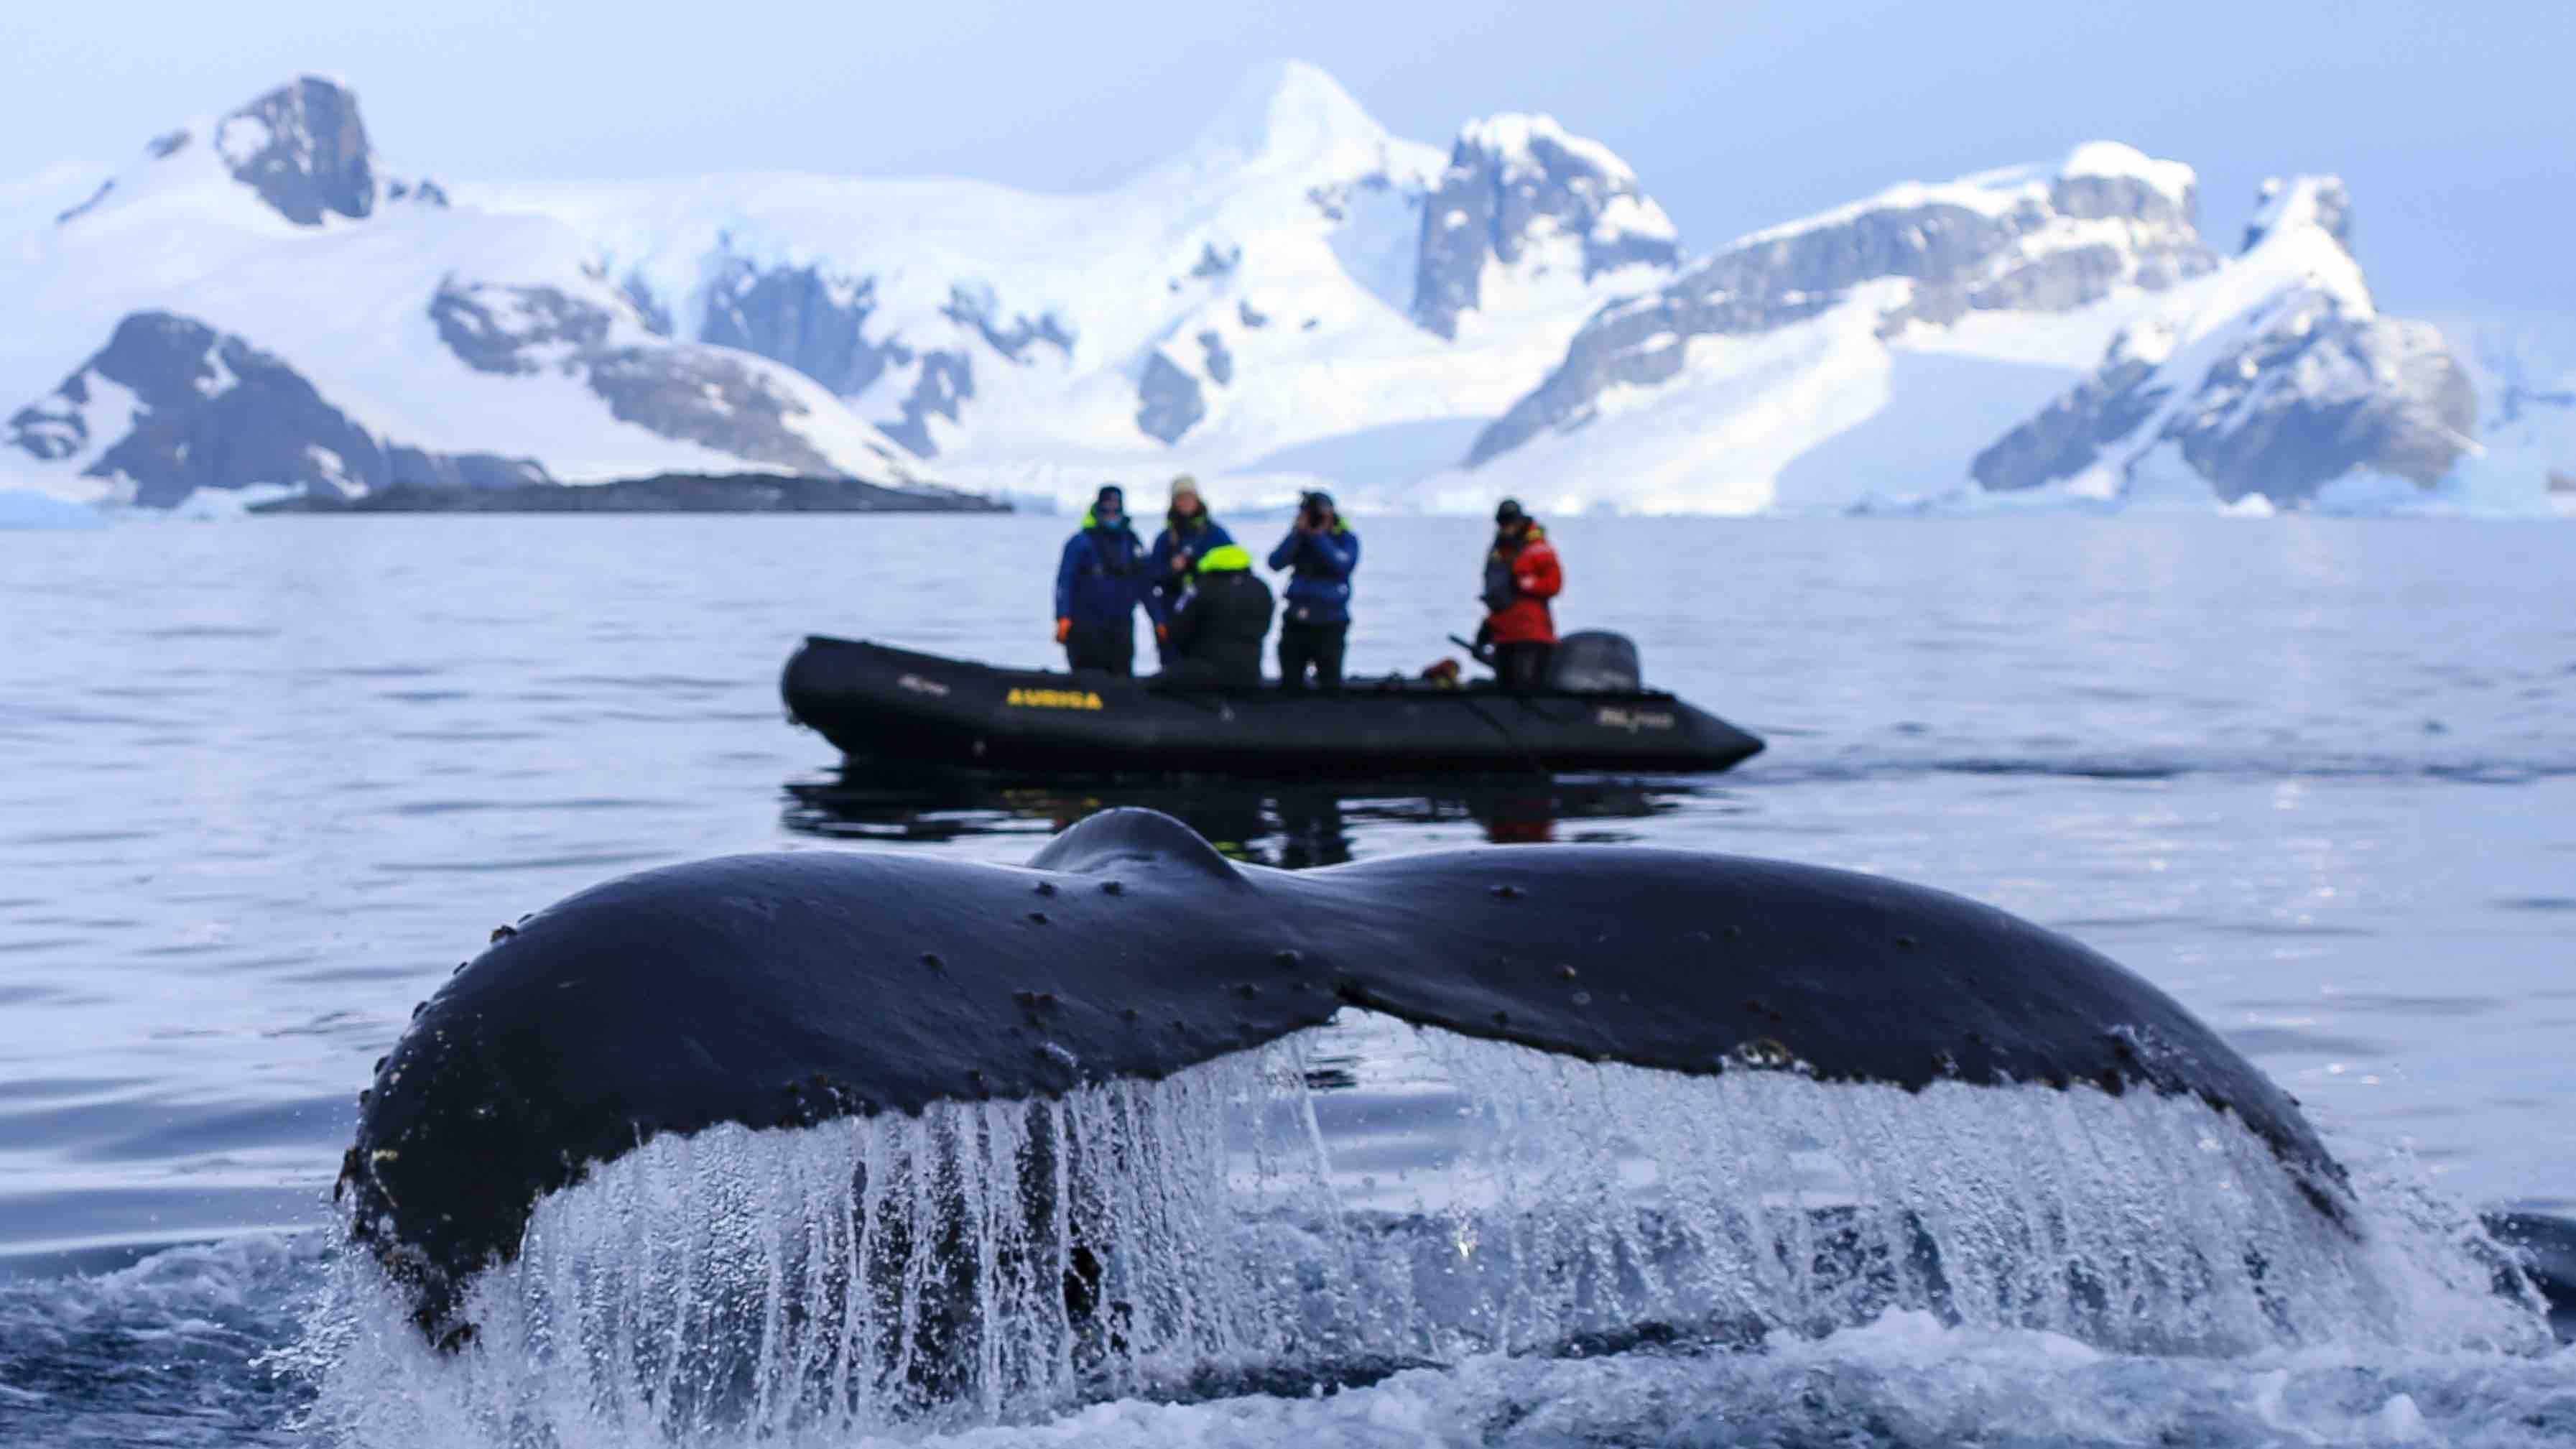 Crossbows and eerie silences – following Antarctic whales for climate change clues